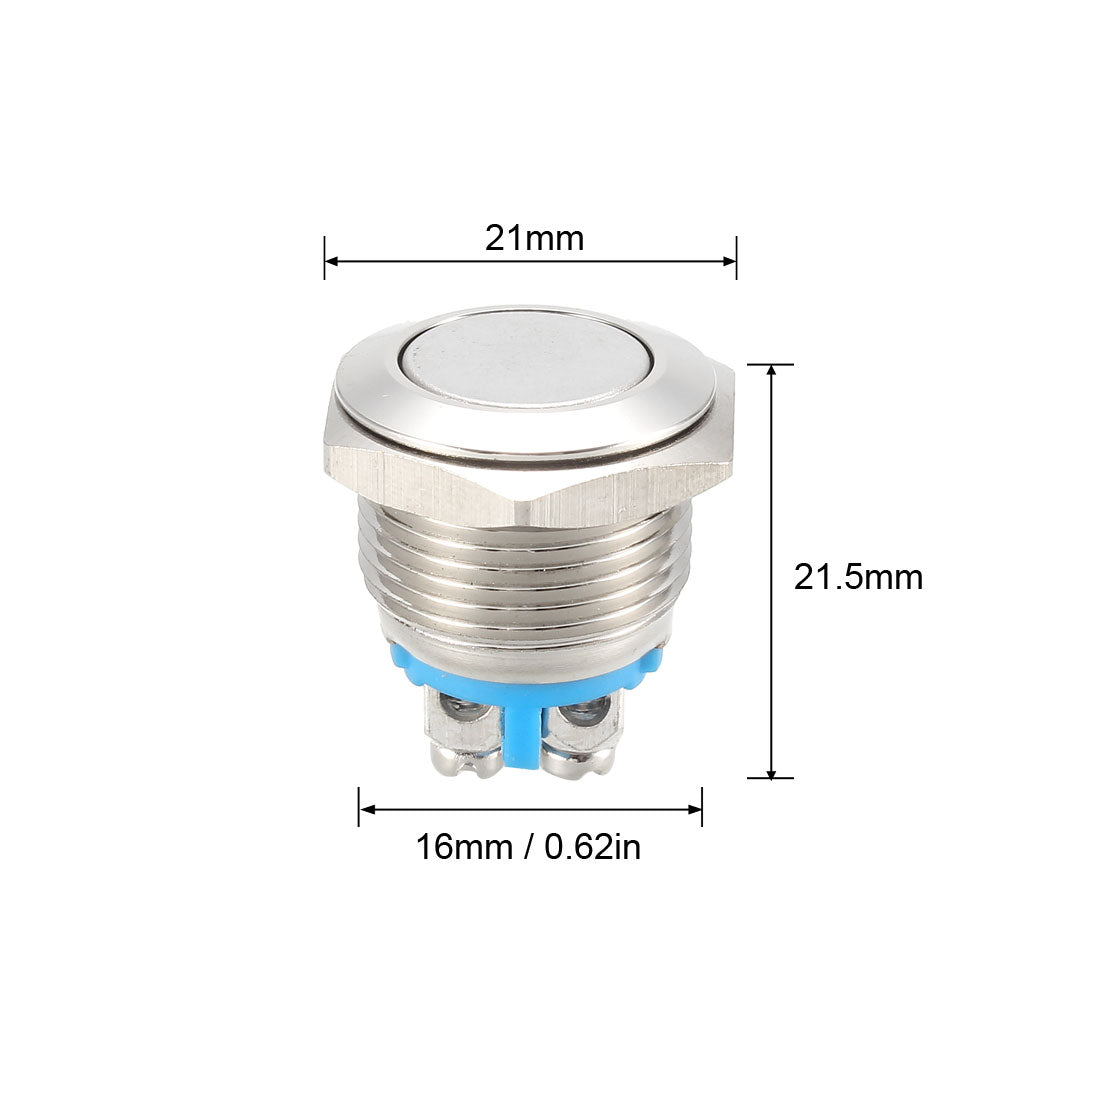 uxcell Uxcell Momentary Metal Push Button Switch Flat Head 16mm Mounting 1NO AC 250V 3A